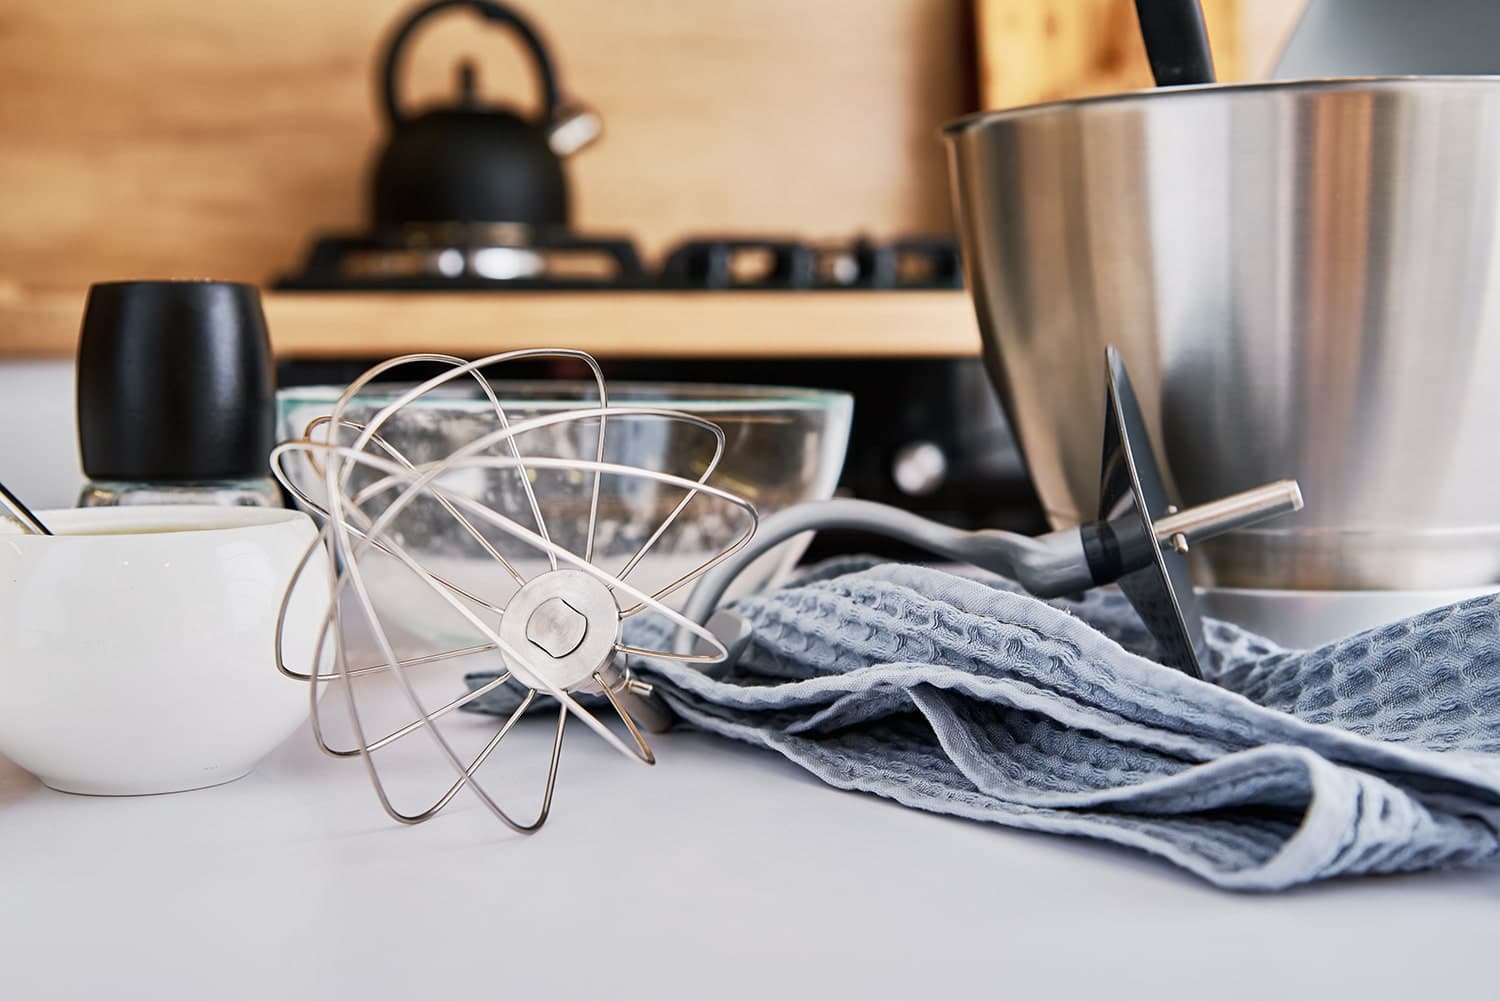 The Ultimate Guide to Buying Kitchen Gadgets Online